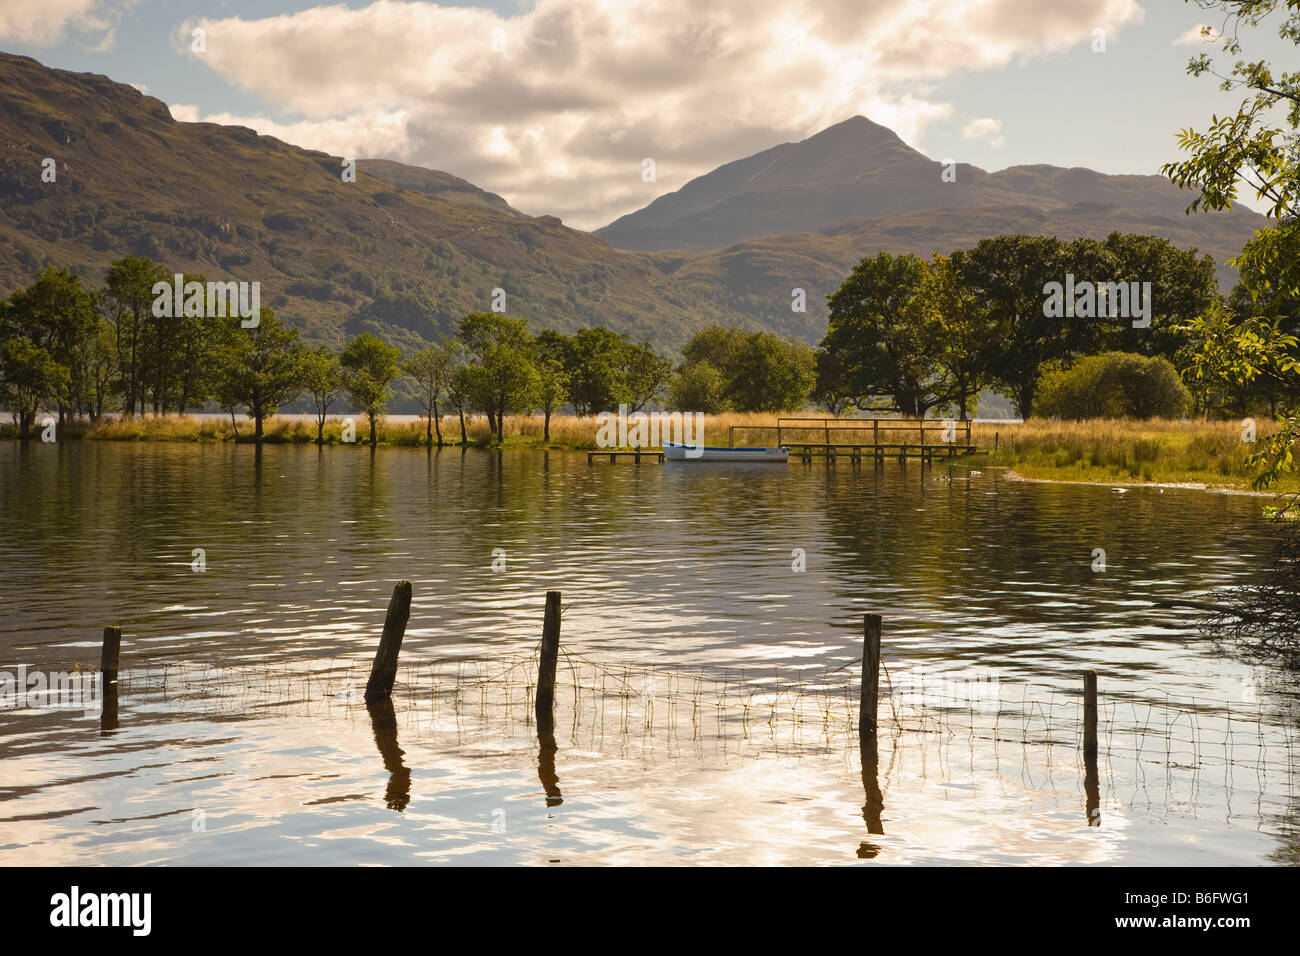 Boat on Loch Lomond Scotland with Ben Lomond in the background Stock Photo